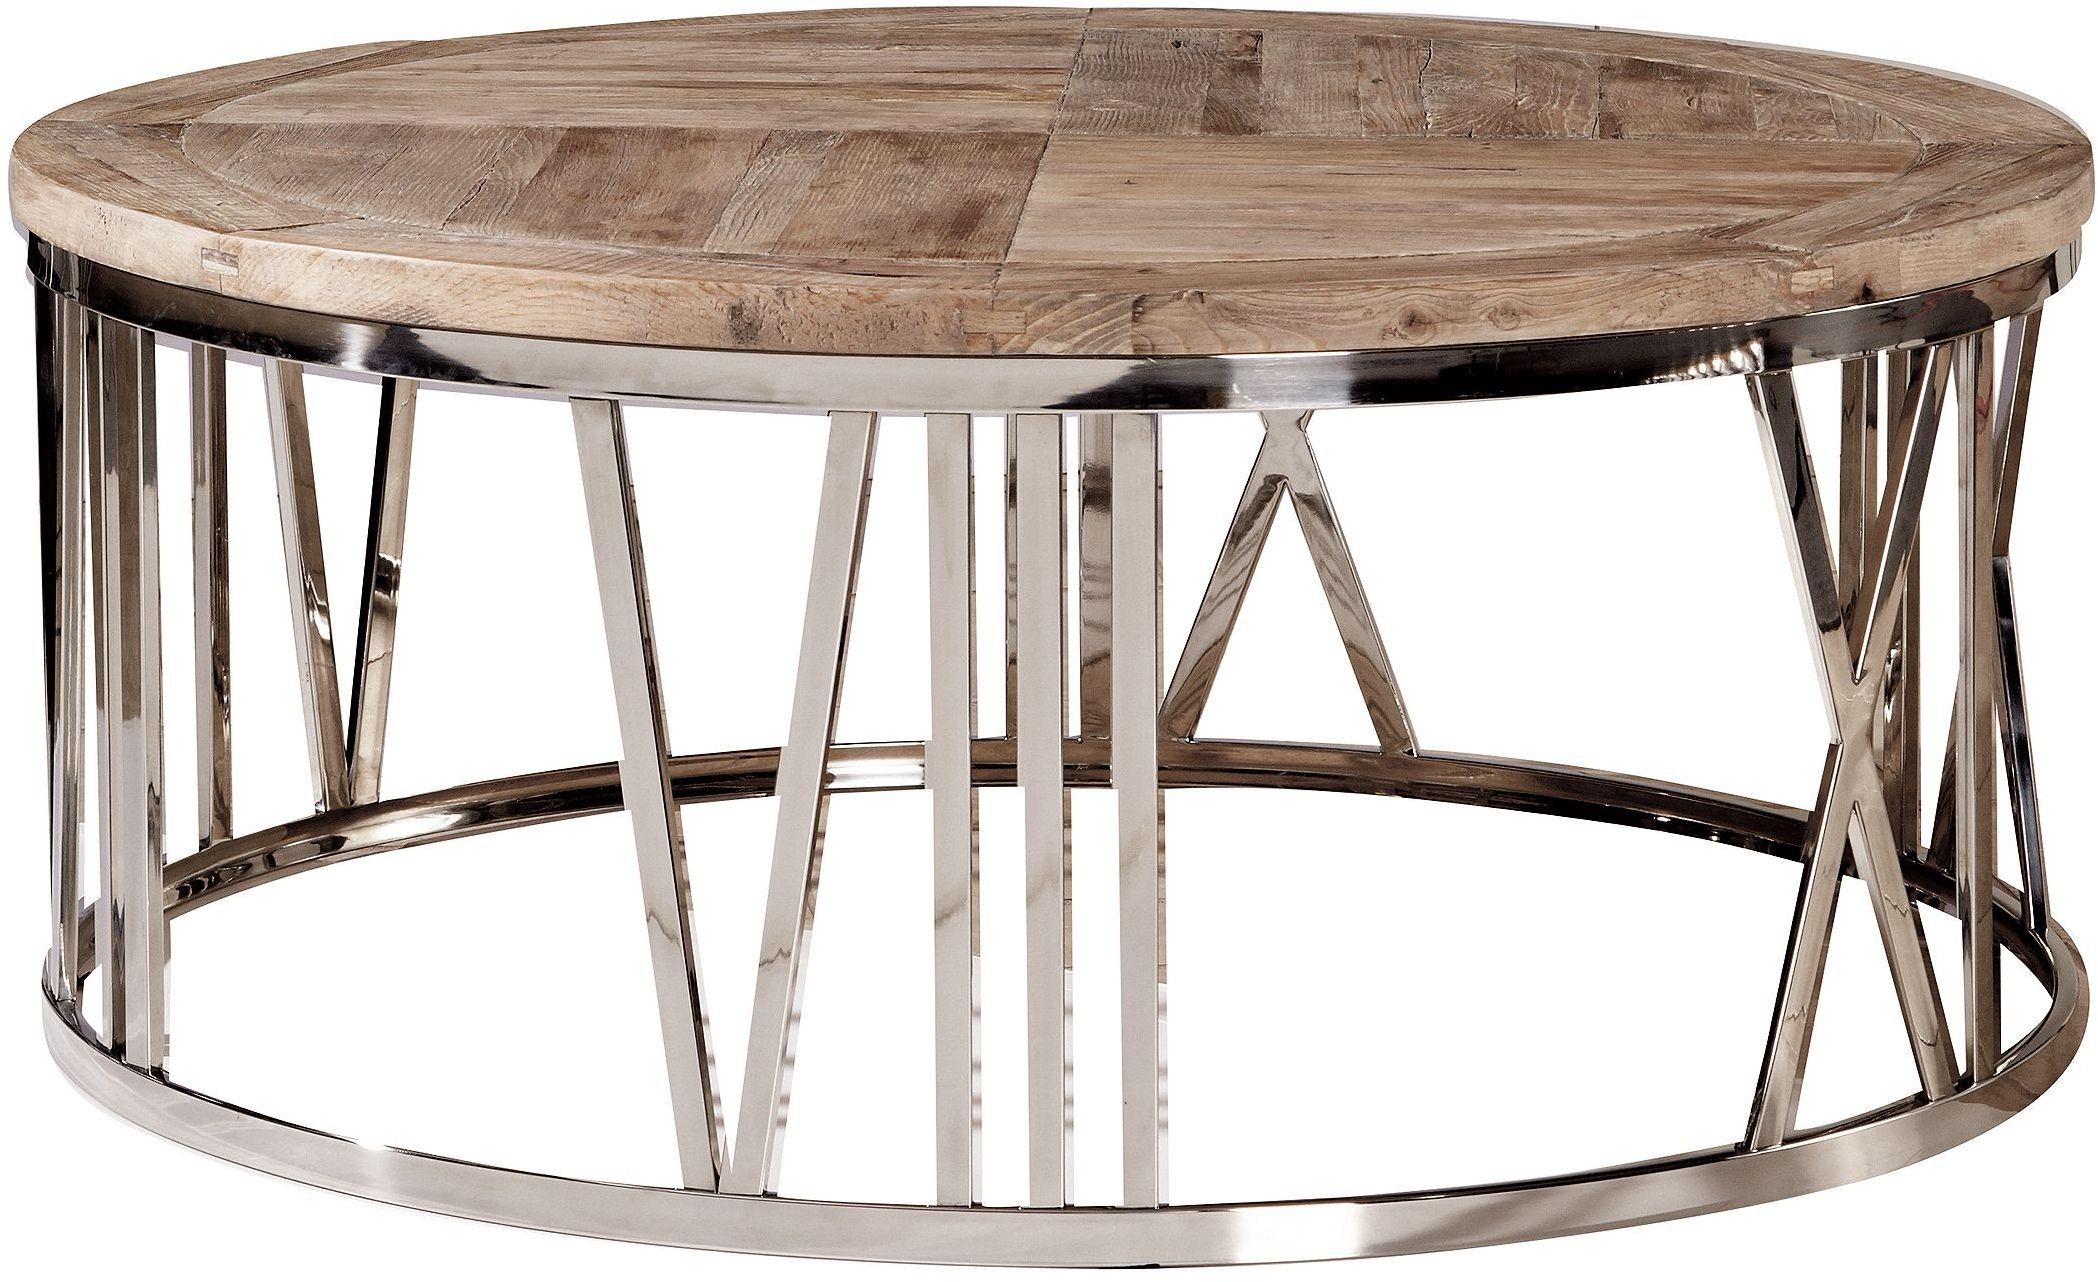 Steel Coffee Table Designs – 10 Superb Stainless Steel Coffee Table With Round Coffee Tables With Steel Frames (View 4 of 15)